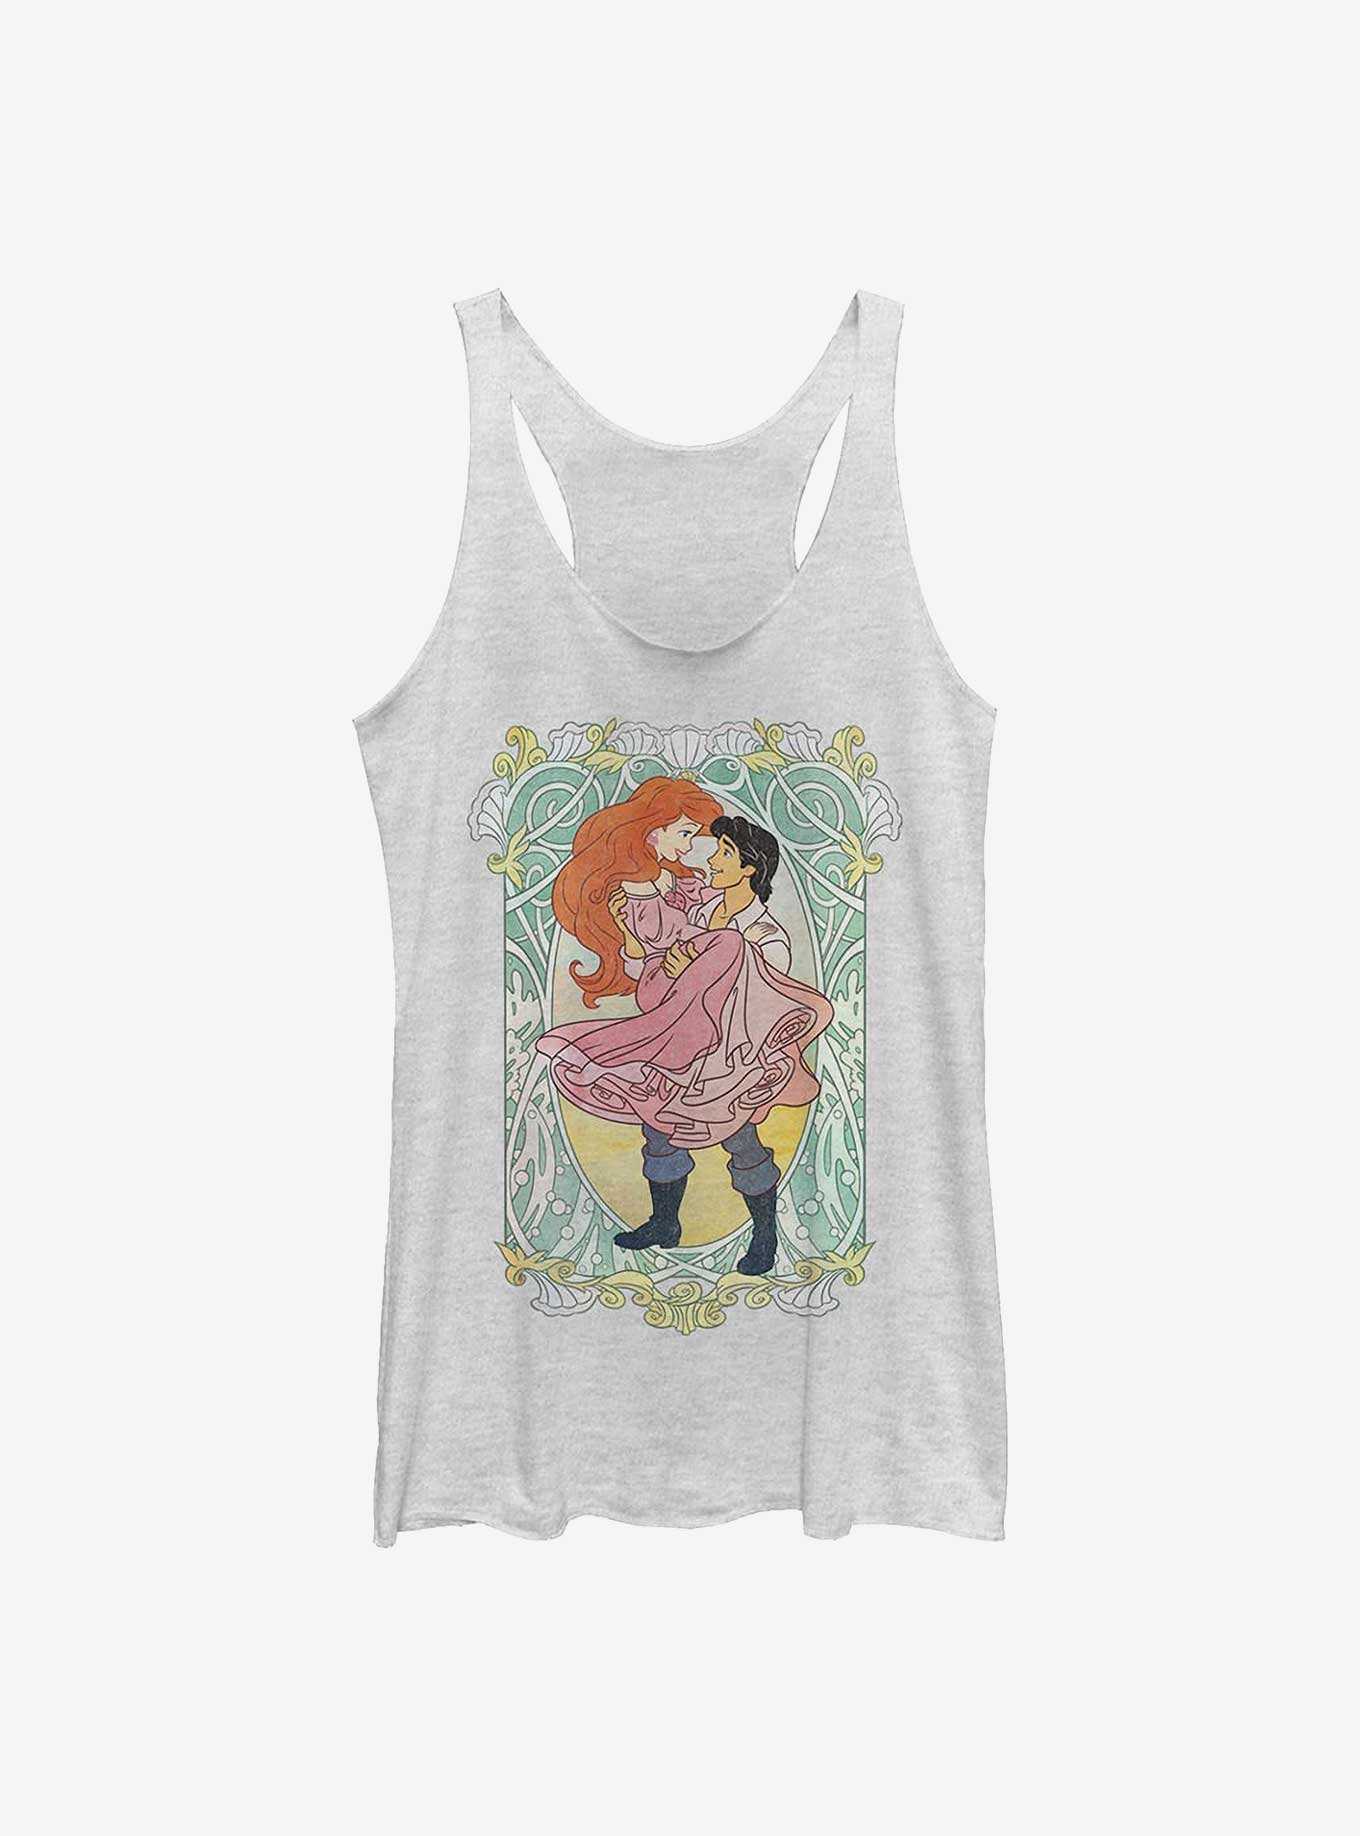 Disney The Little Mermaid Ariel and Eric Ever After Girls Tank, , hi-res